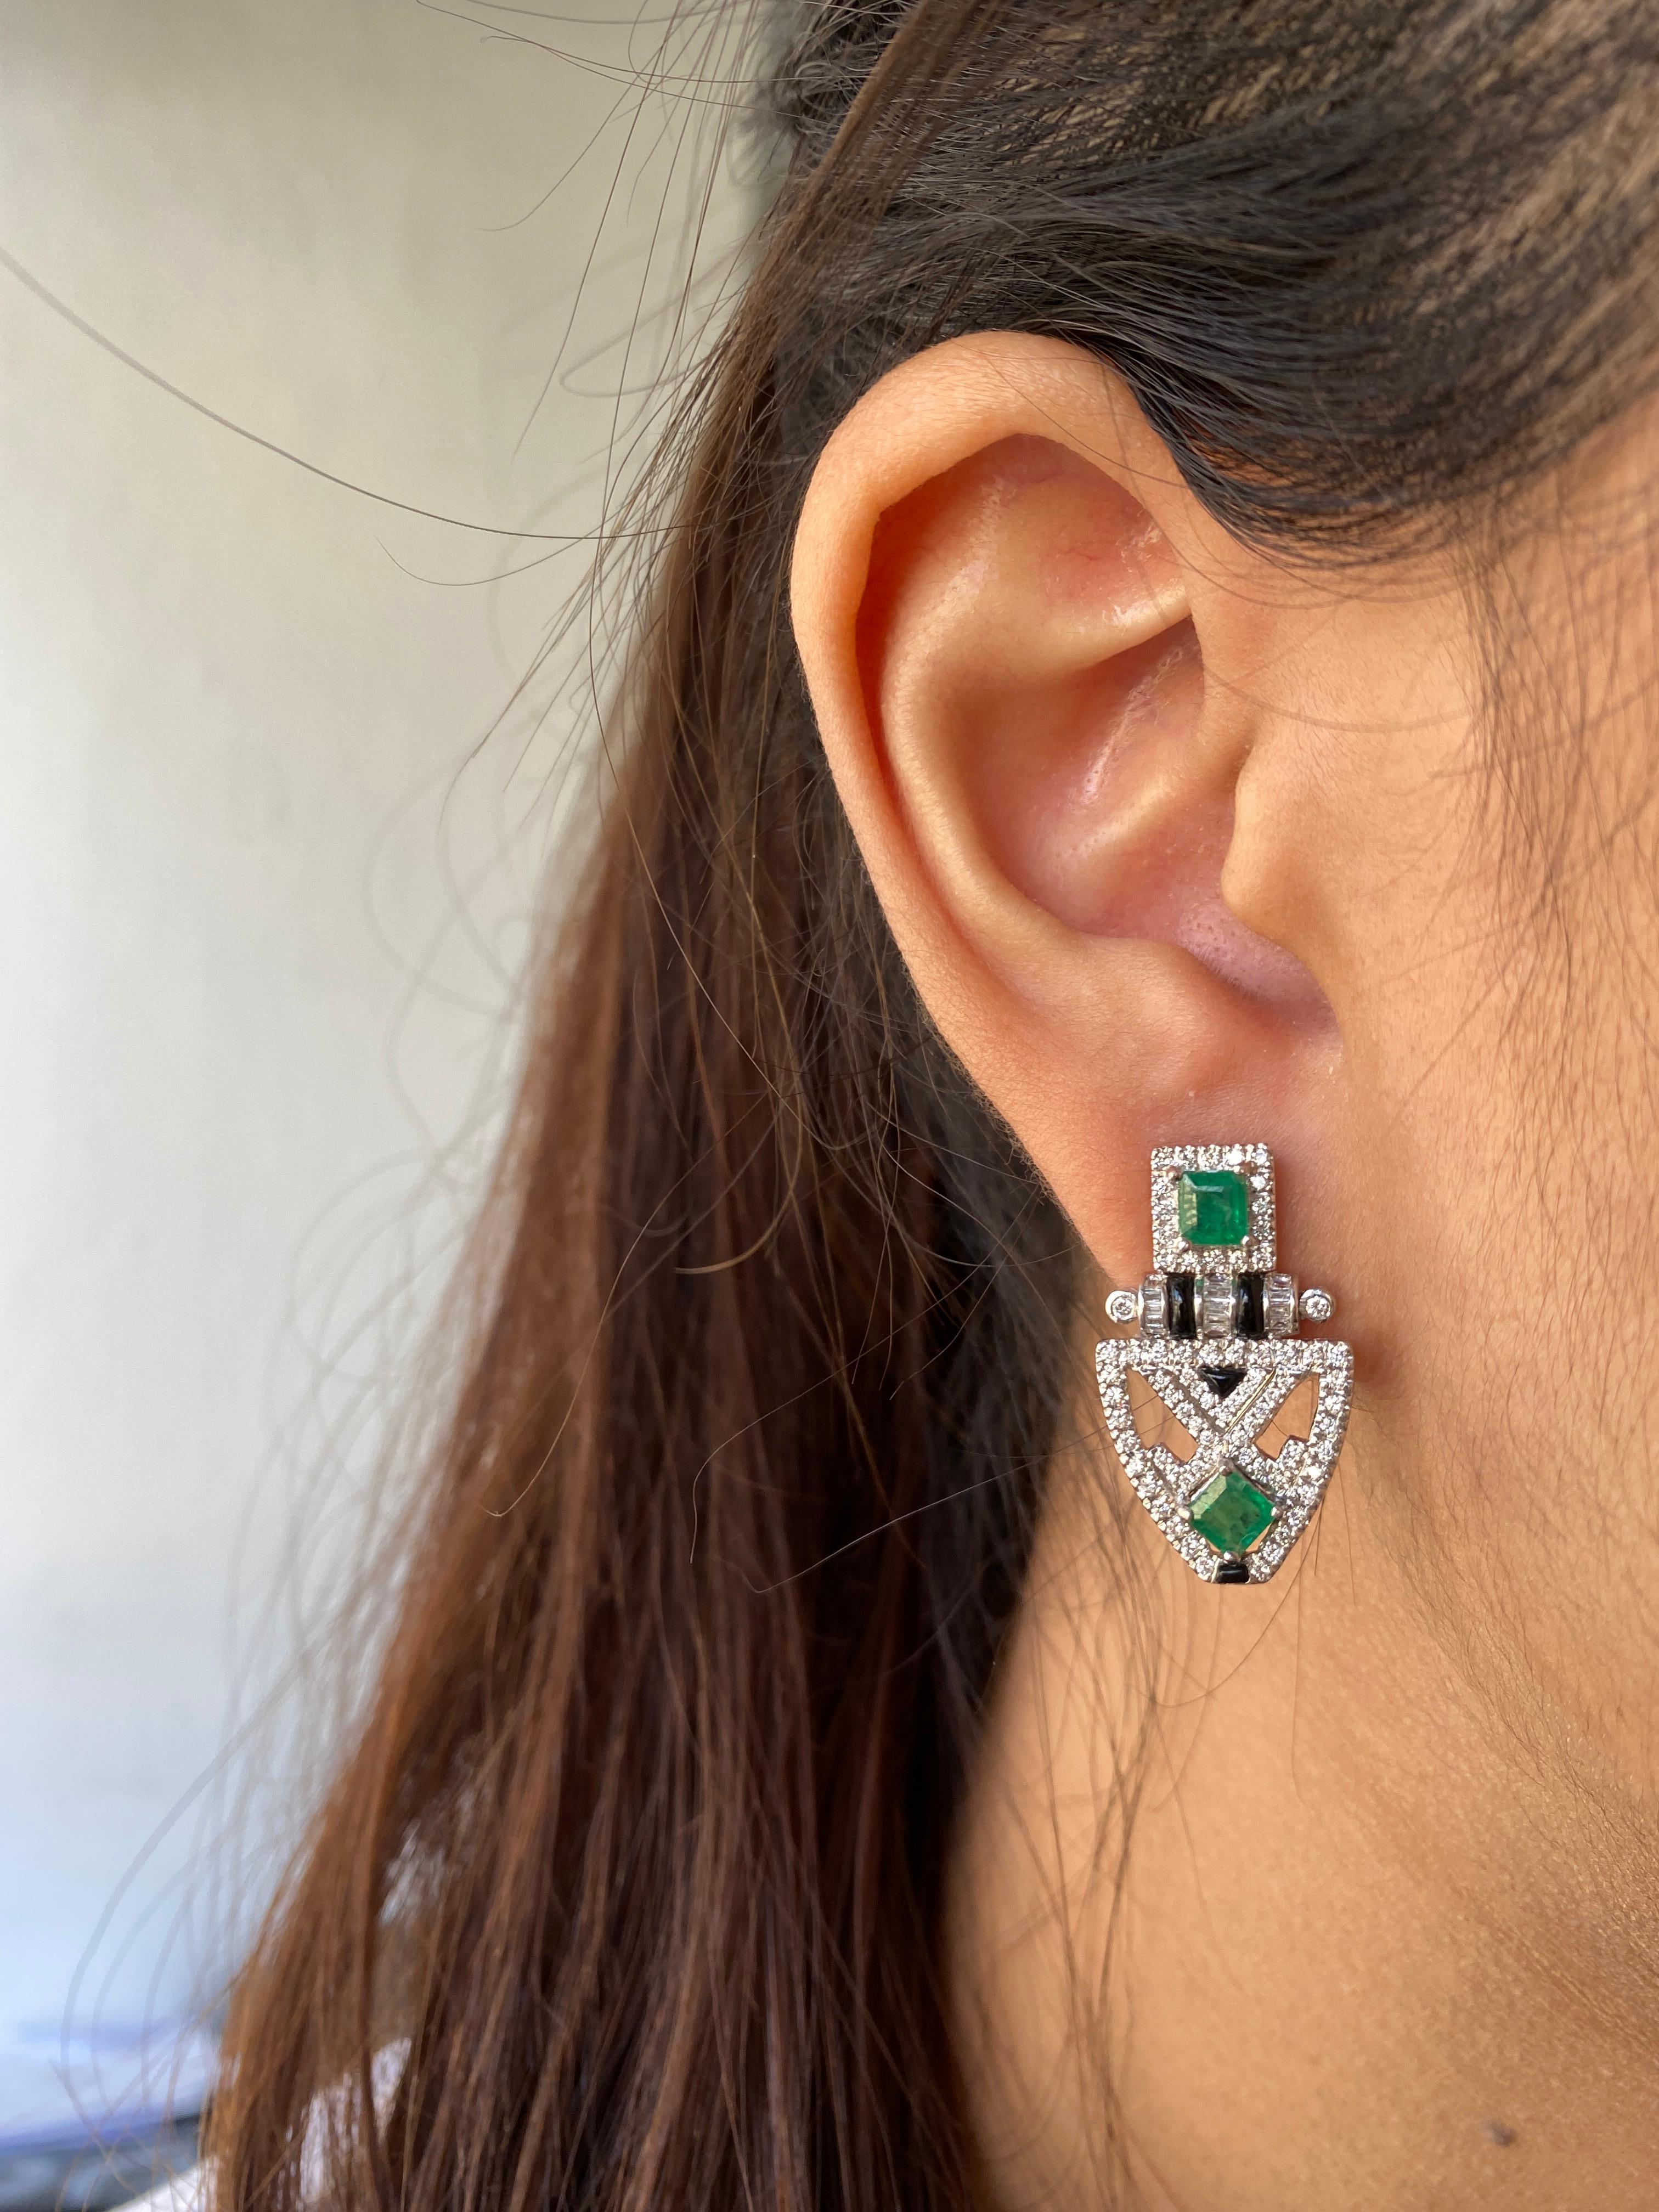 An art-deco inspired pair of earrings, consisting of 1.43 carat Zambian Emeralds and 1.14 carat White Diamonds with Black Onyx - all set in solid 18K White Gold. The measurements are 25mm x 13 mm. These come with a push-pull backing. 
We provide